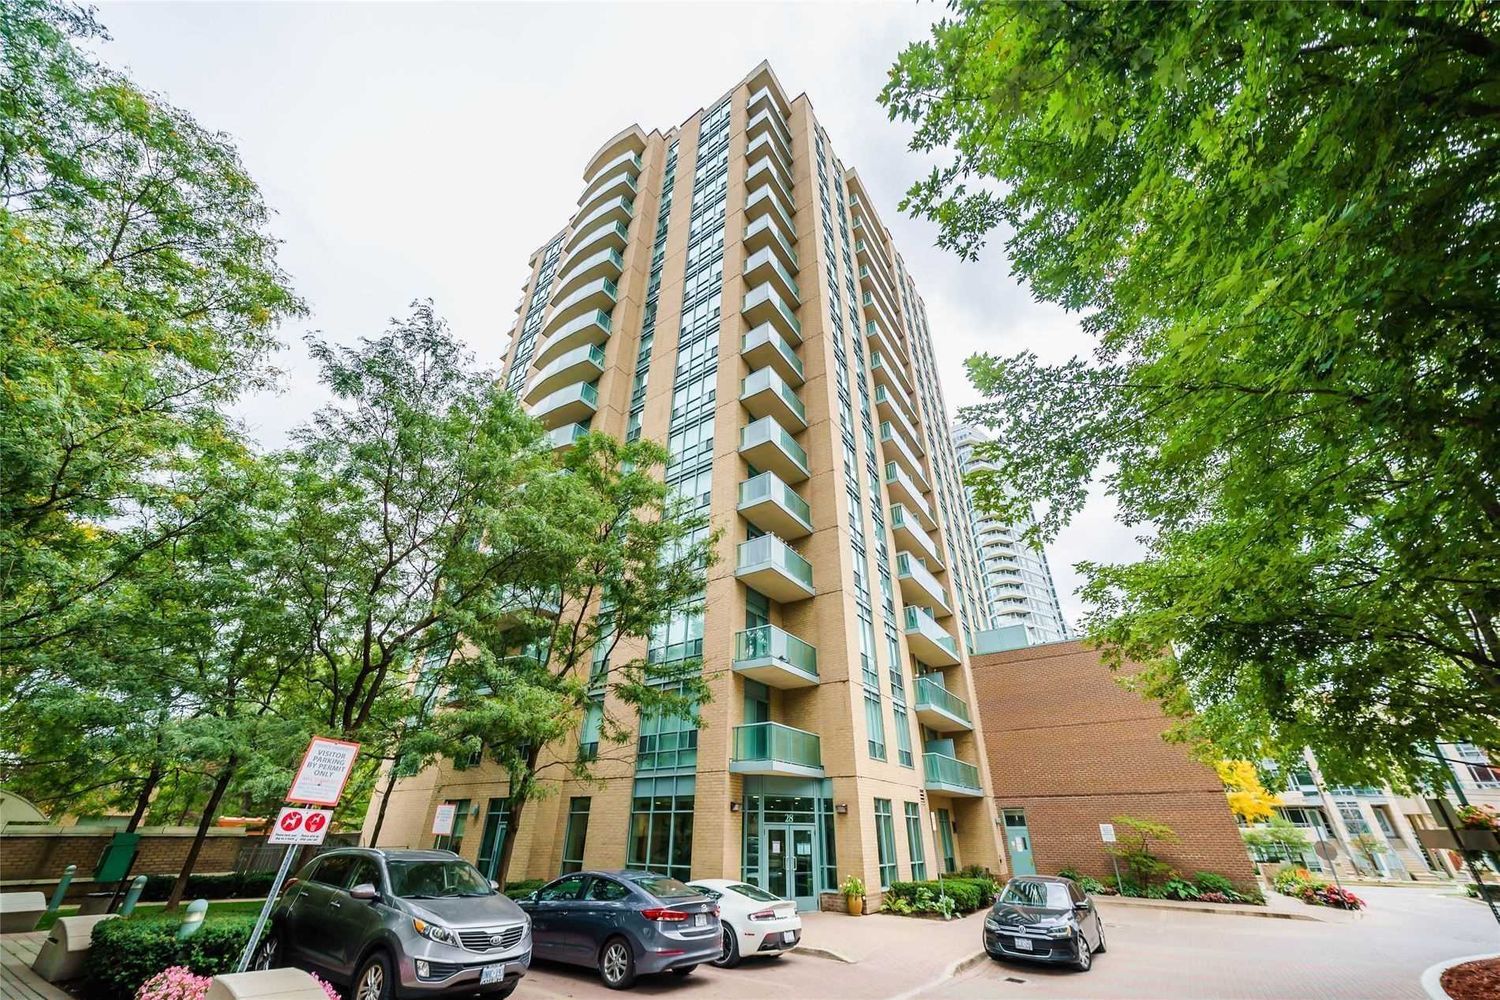 28 Olive Avenue. Princess Place II Condos is located in  North York, Toronto - image #1 of 2